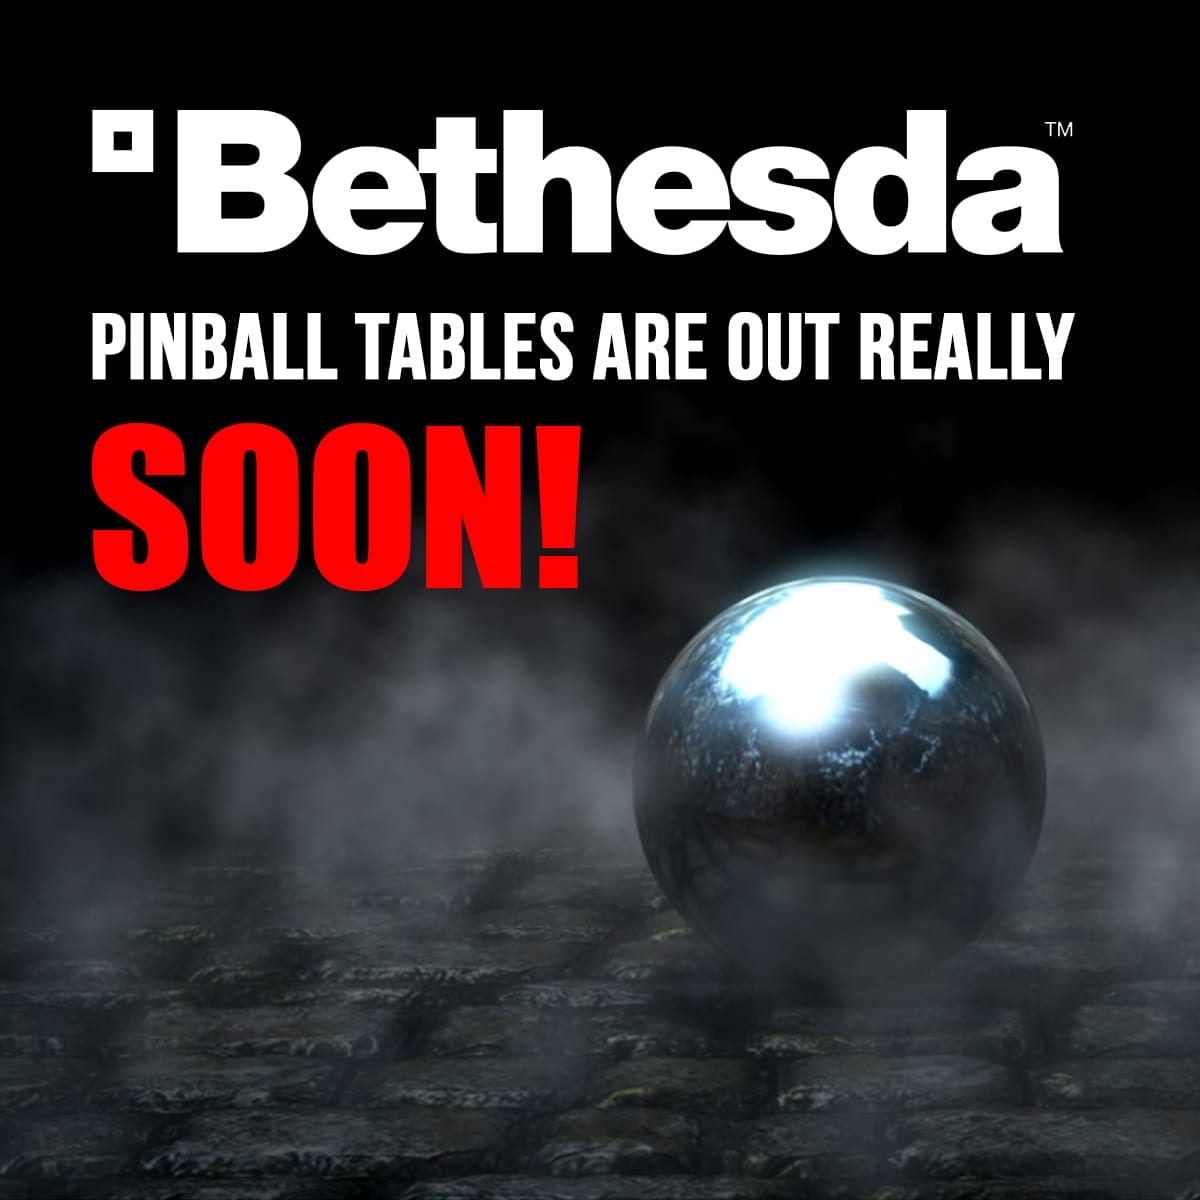 Bethesda Pinball Tables are Out Really Soon!